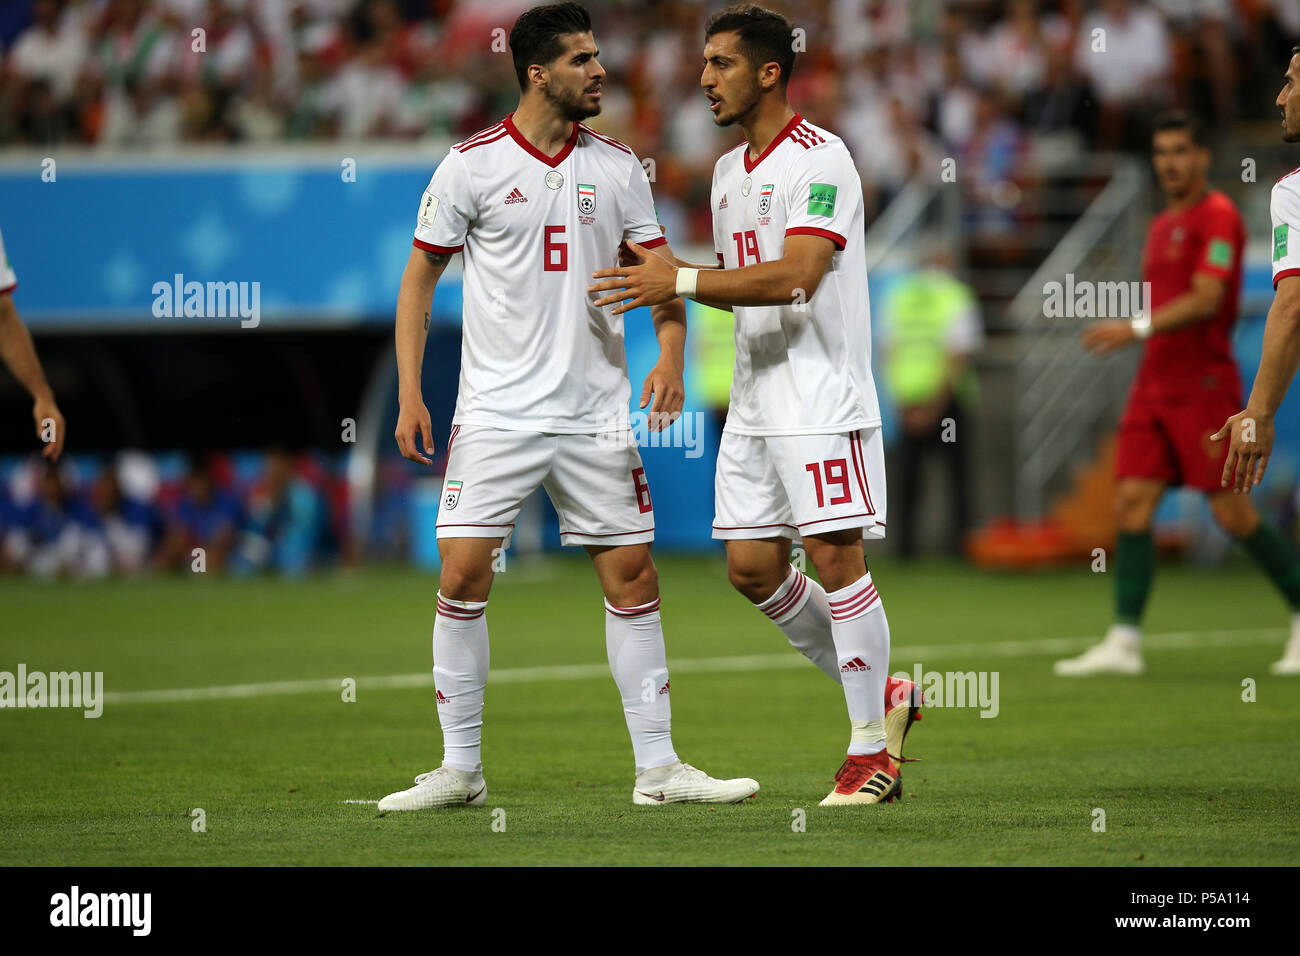 Saransk, Russia. 26th June, 2018. 25.06.2018. Saransk, Russia:SAEID EZATOLAHI, MAJID HOSSEINI in action during the Fifa World Cup Russia 2018, Group B, football match between IRAN V PORTUGAL in MORDOVIA ARENA STADIUM in SARANSK. Credit: Independent Photo Agency/Alamy Live News Stock Photo